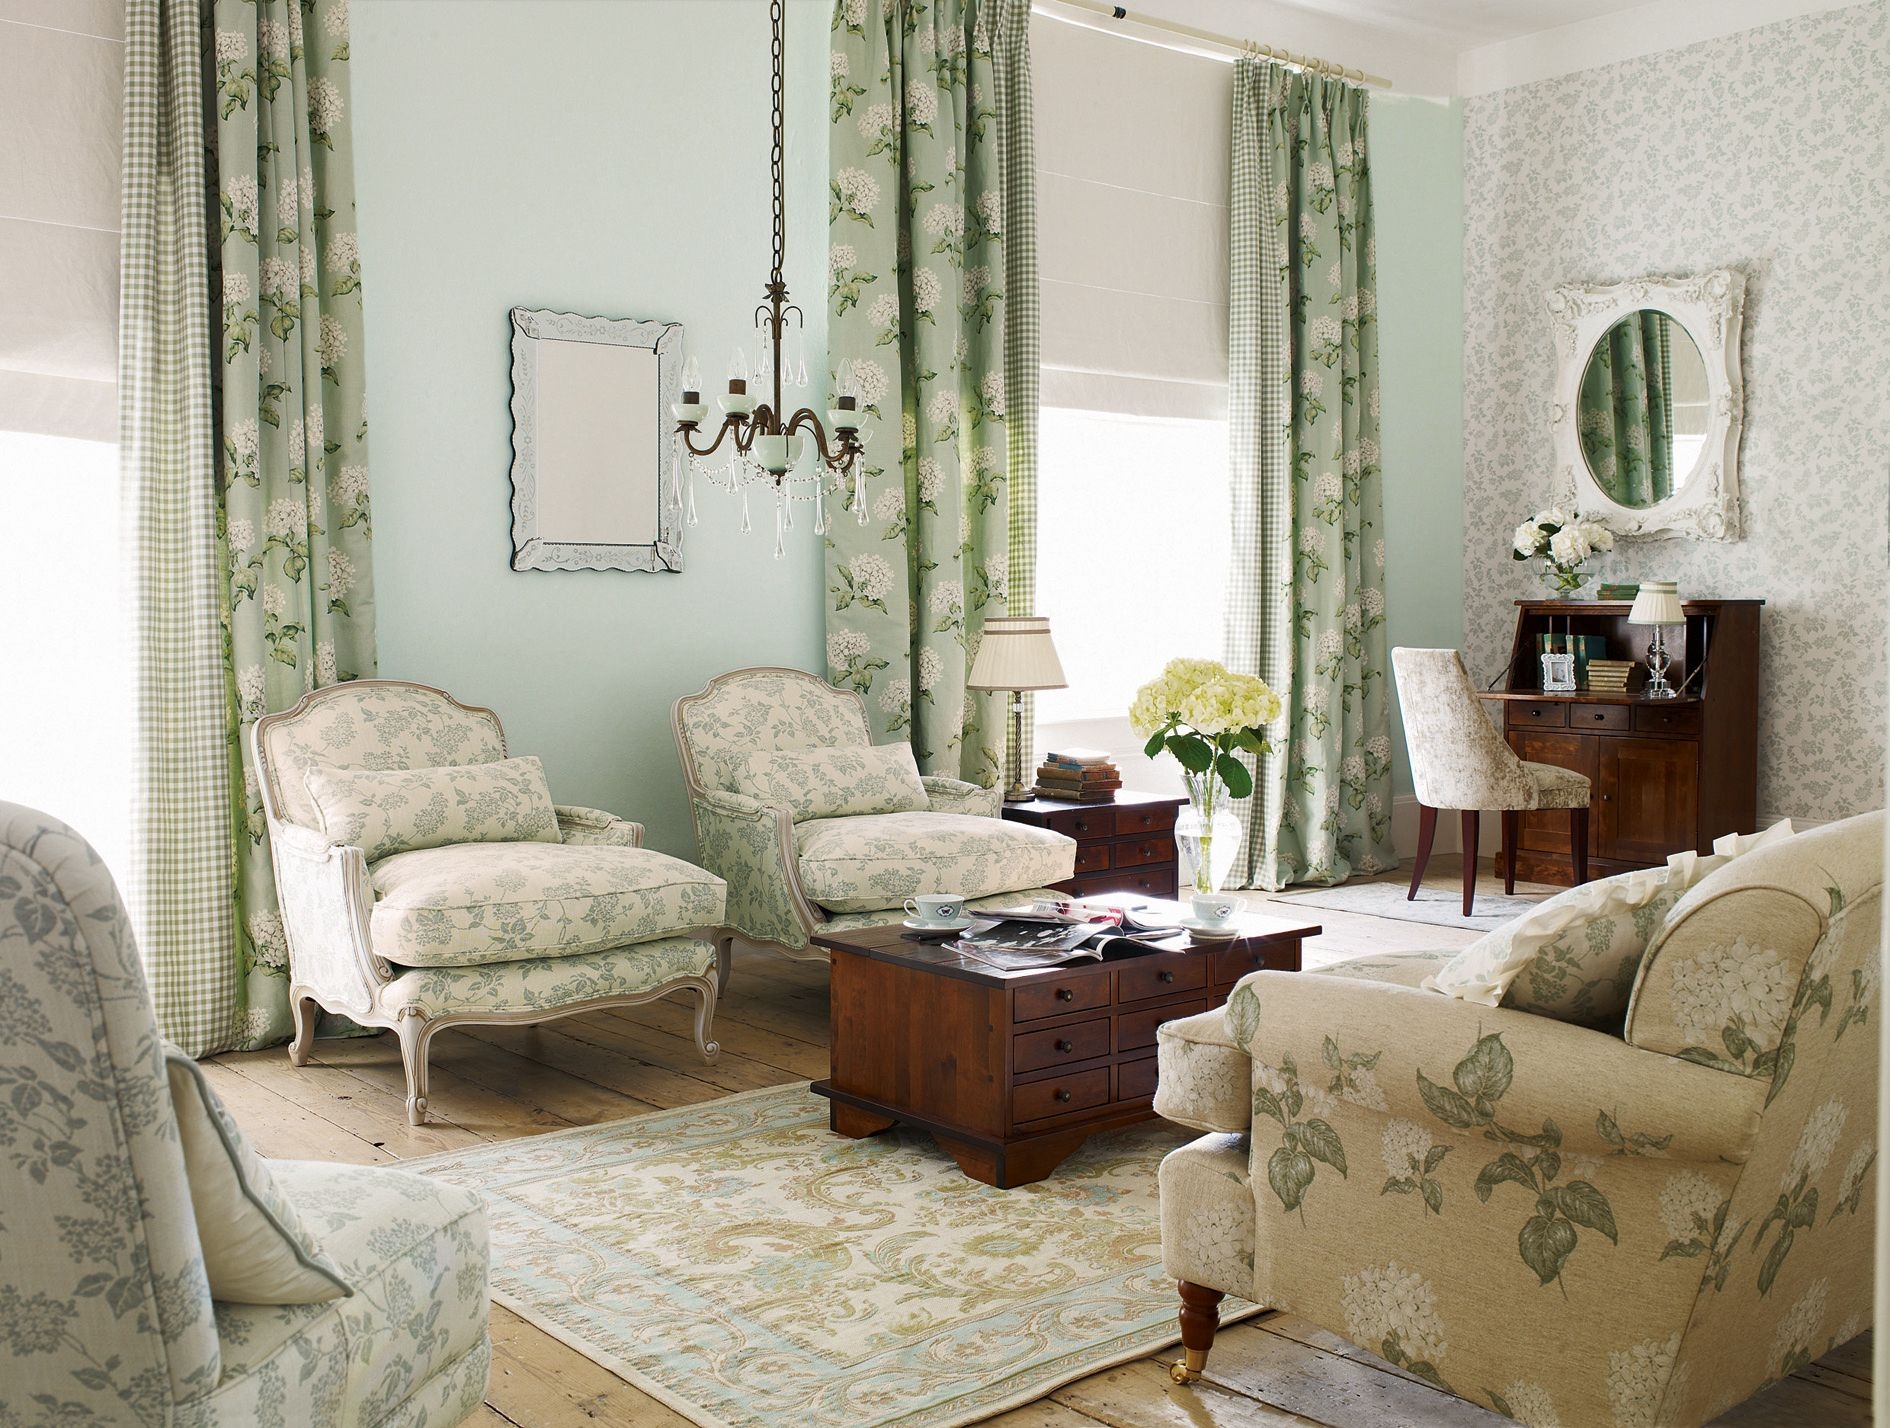 Chairs heligan sofa living room furniture and sofas laura ashley